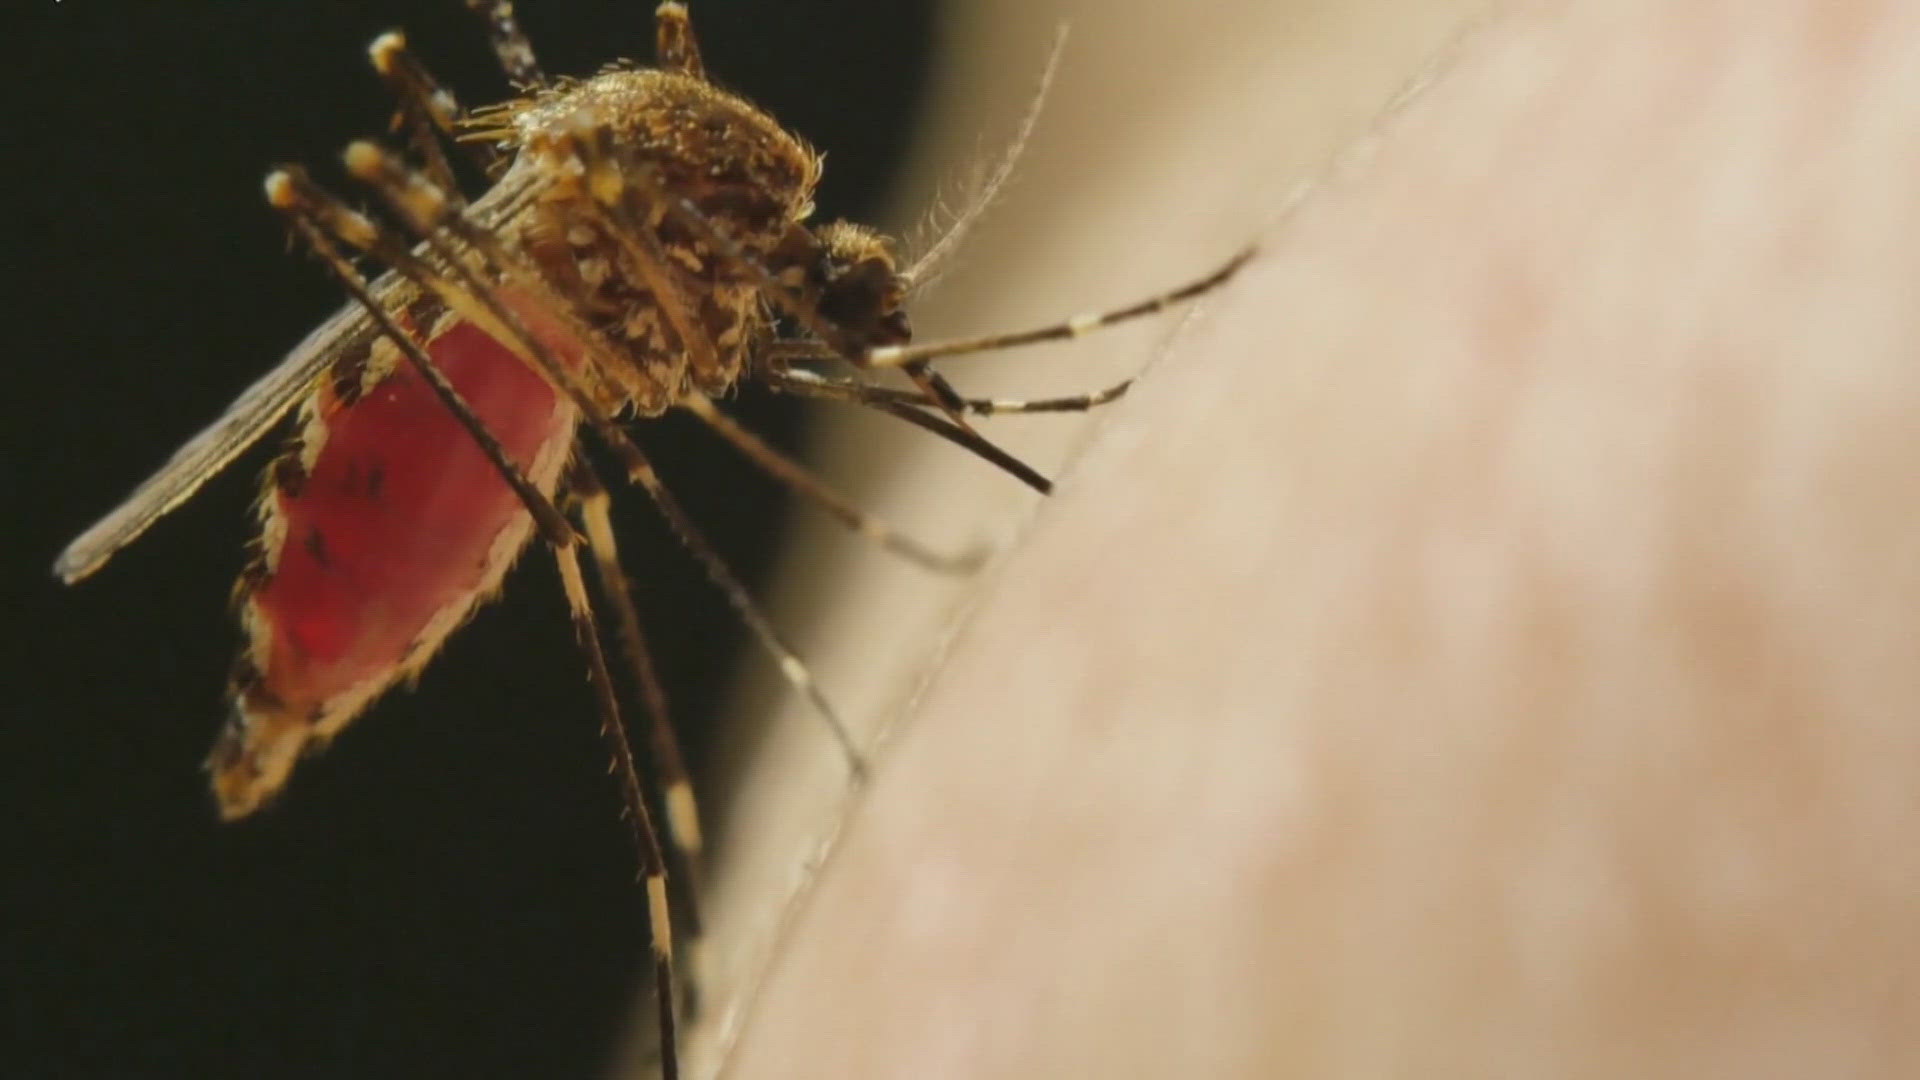 Staff at Arrow Exterminators said they get calls about mosquito infestations in homes every day.